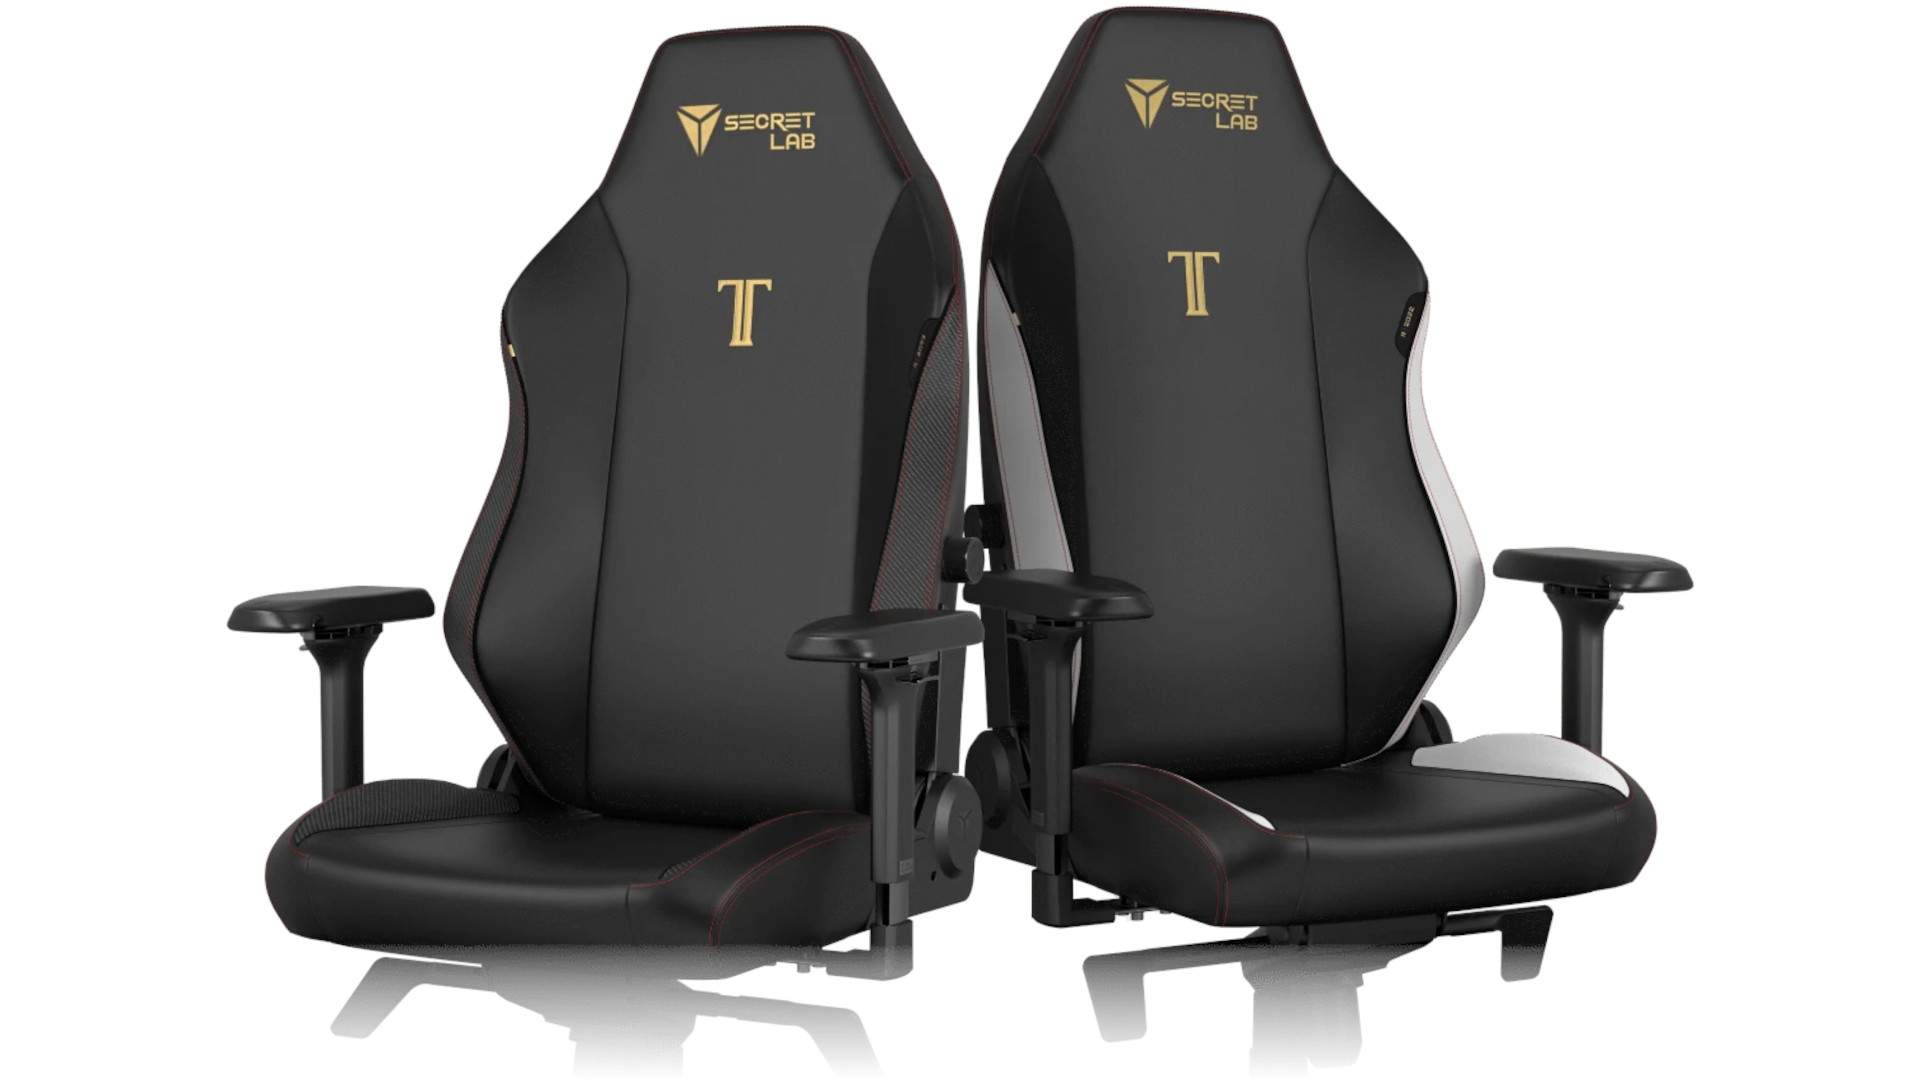 Secretlab's chair is currently discounted for Black Friday